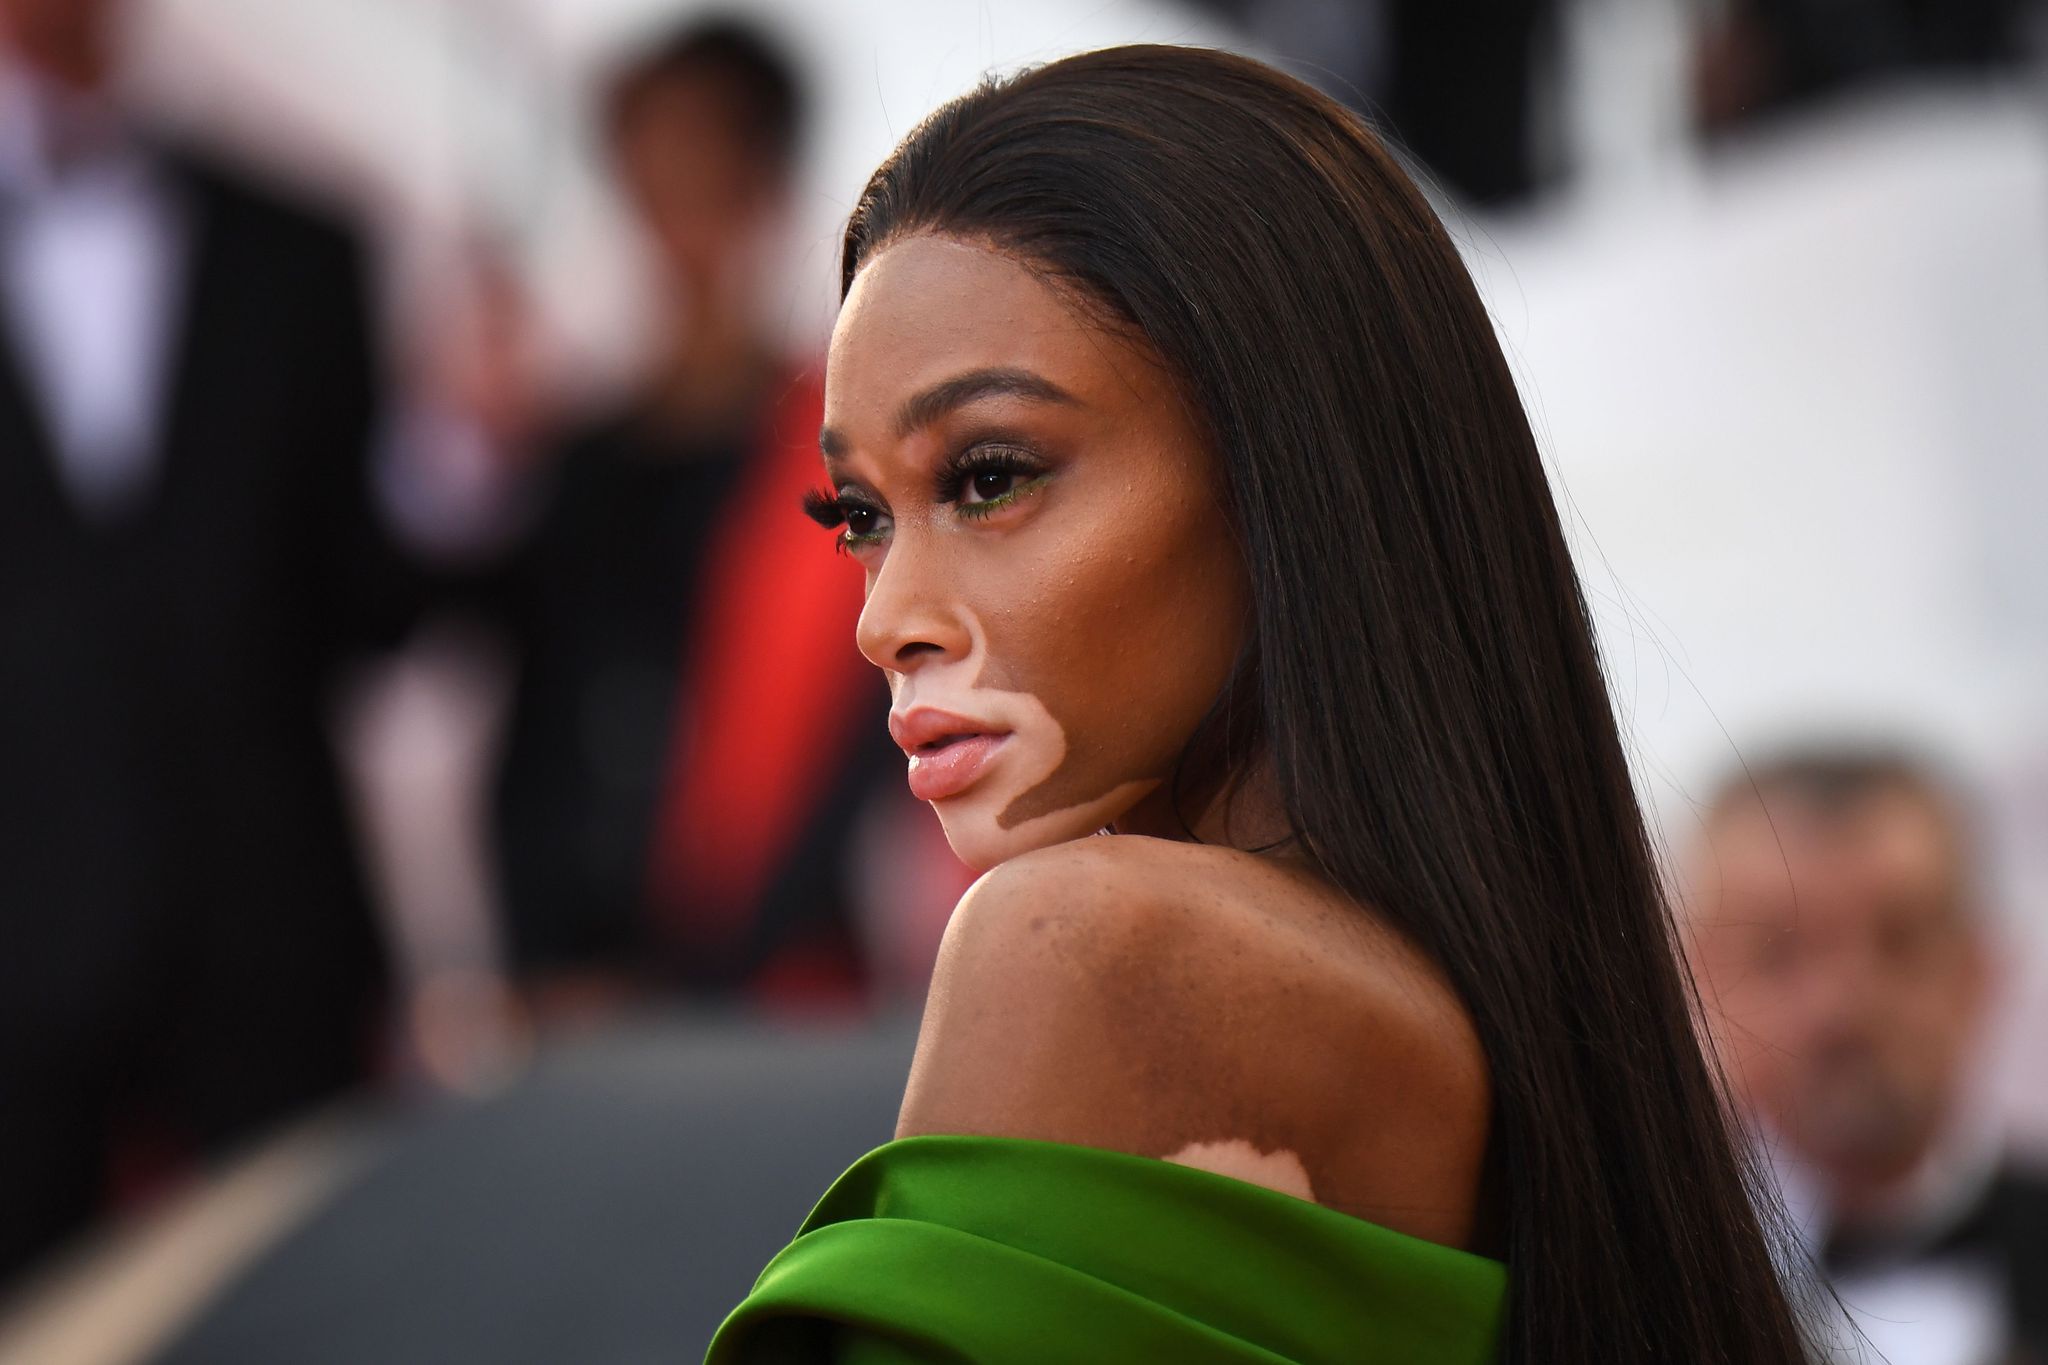 canadian model winnie harlow poses as she arrives on may 14, 2018 for the screening of the film blackkklansman at the 71st edition of the cannes film festival in cannes, southern france photo by anne christine poujoulat  afp        photo credit should read anne christine poujoulatafp via getty images